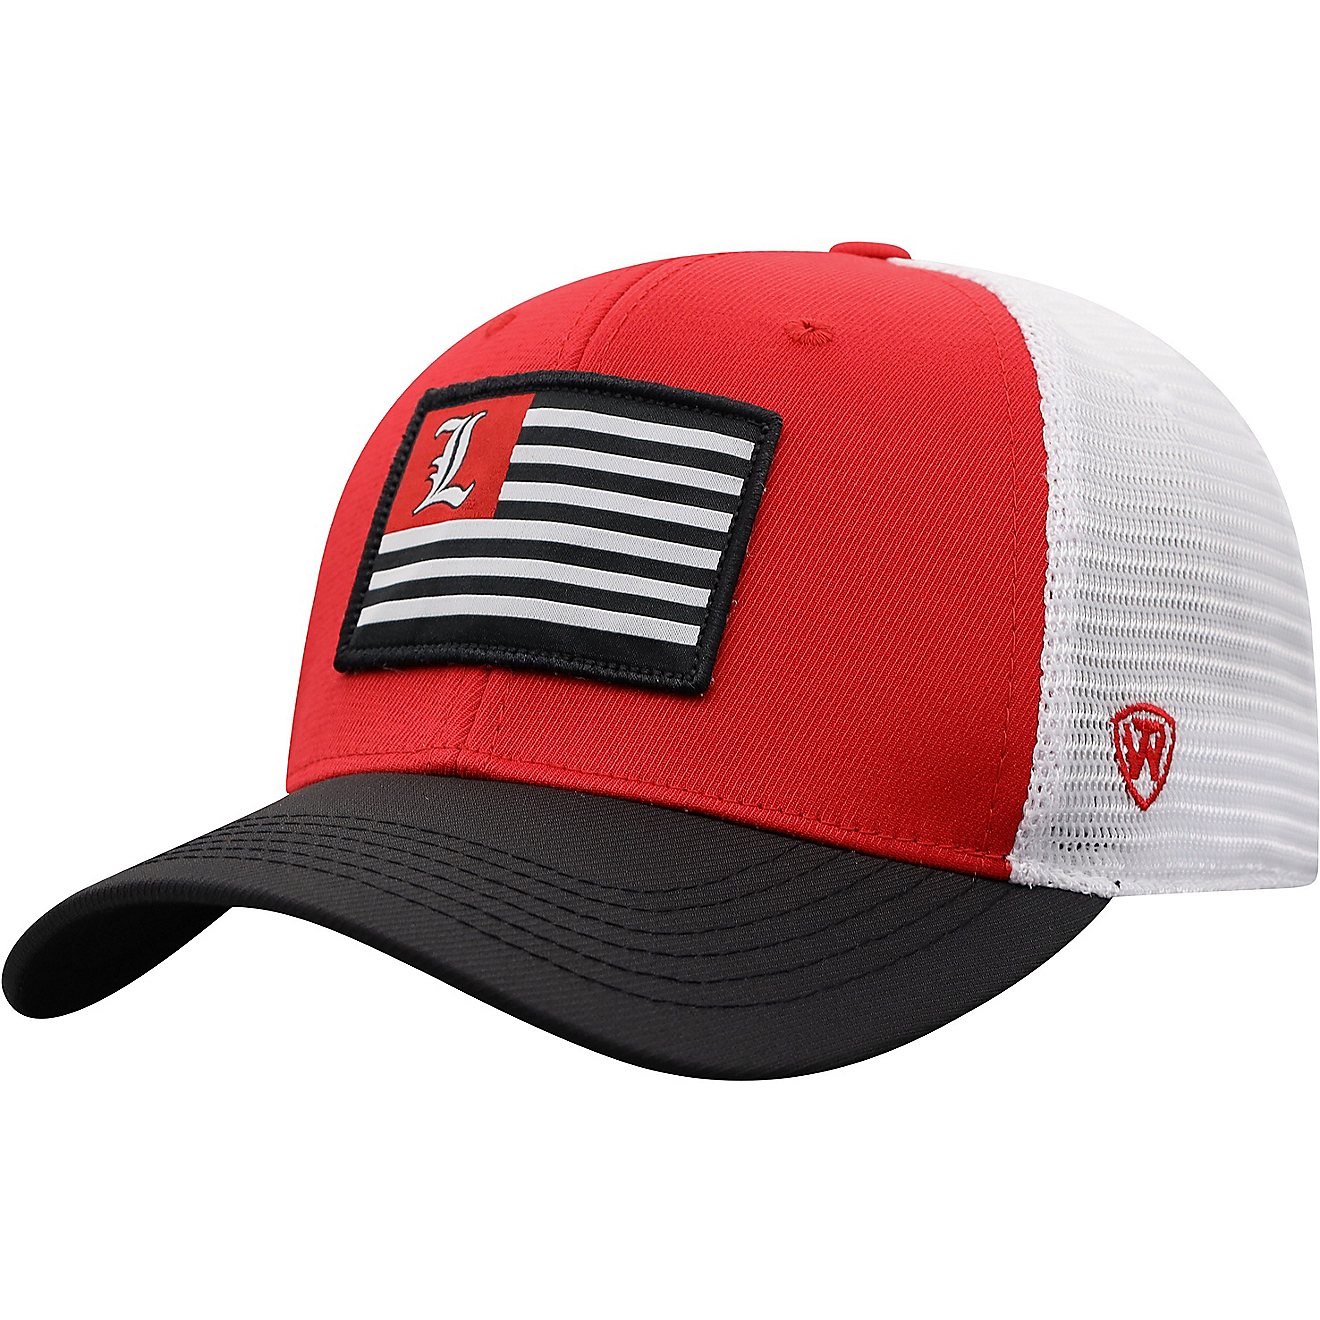 Top of the World University of Louisville Pedigree 1 Fit Cap                                                                     - view number 1